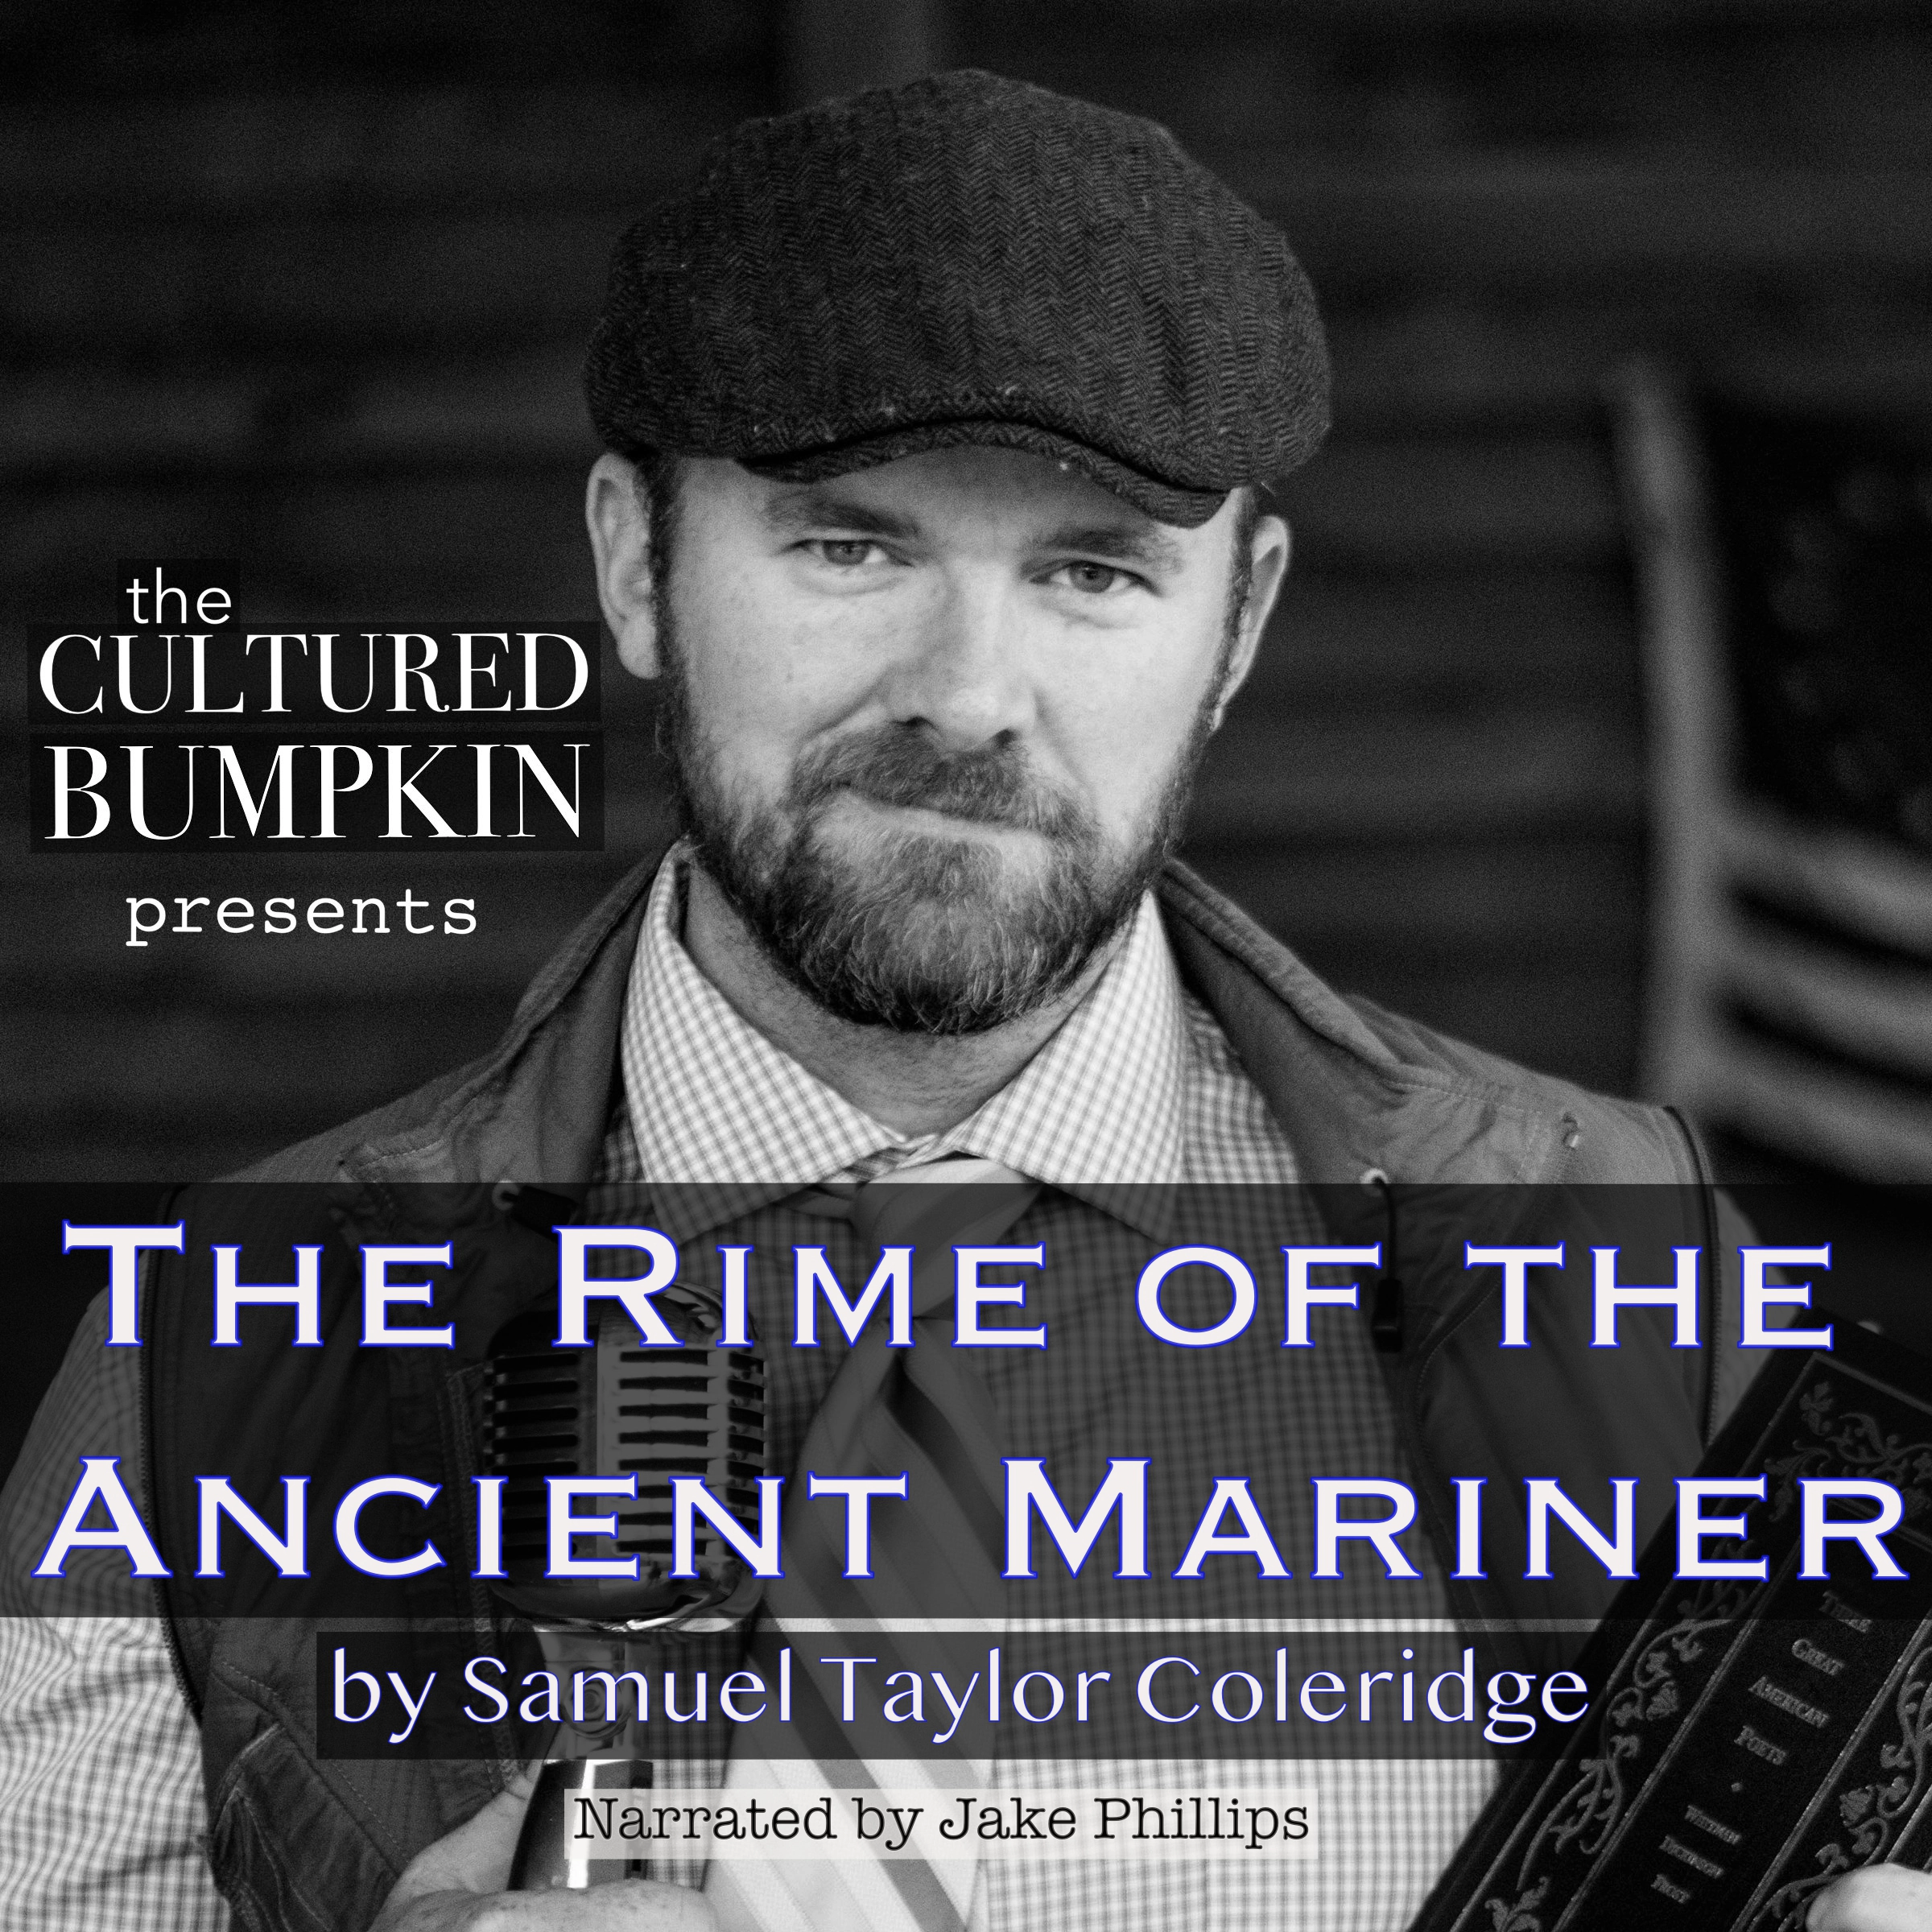 The Cultured Bumpkin Presents: The Rime of the Ancient Mariner by Samuel Taylor Coleridge Audiobook